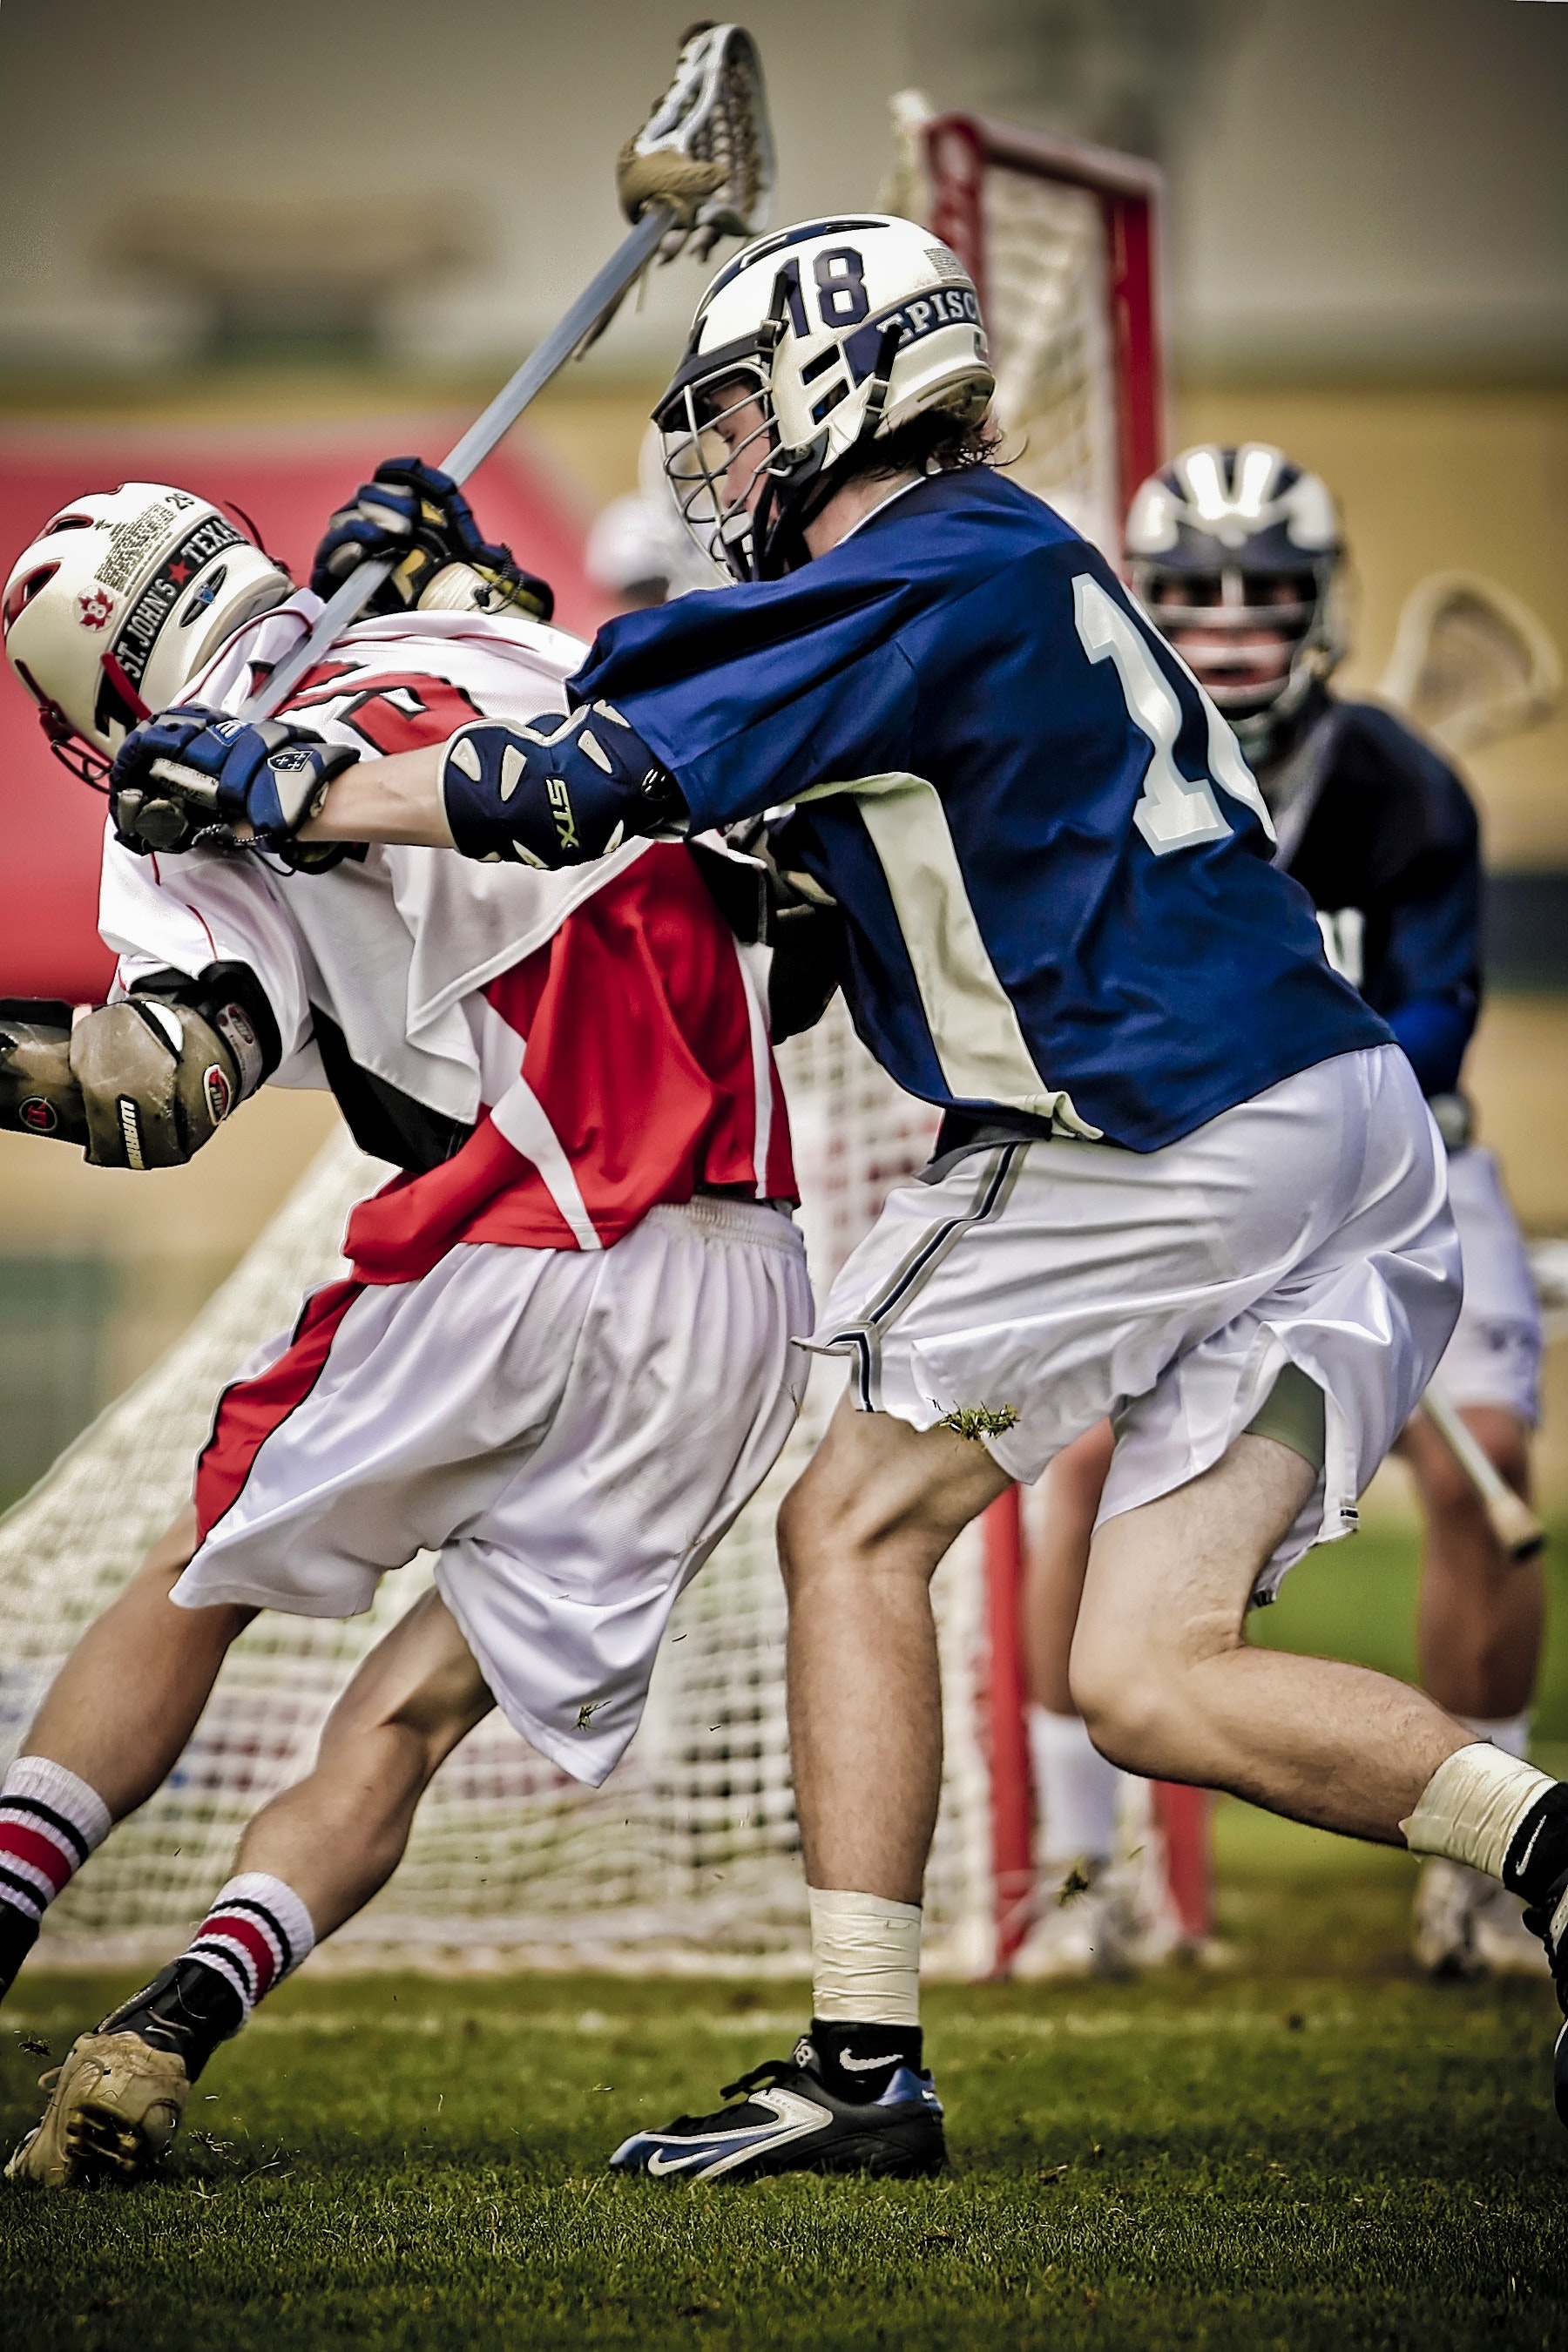 Lacross player battling on the field photo